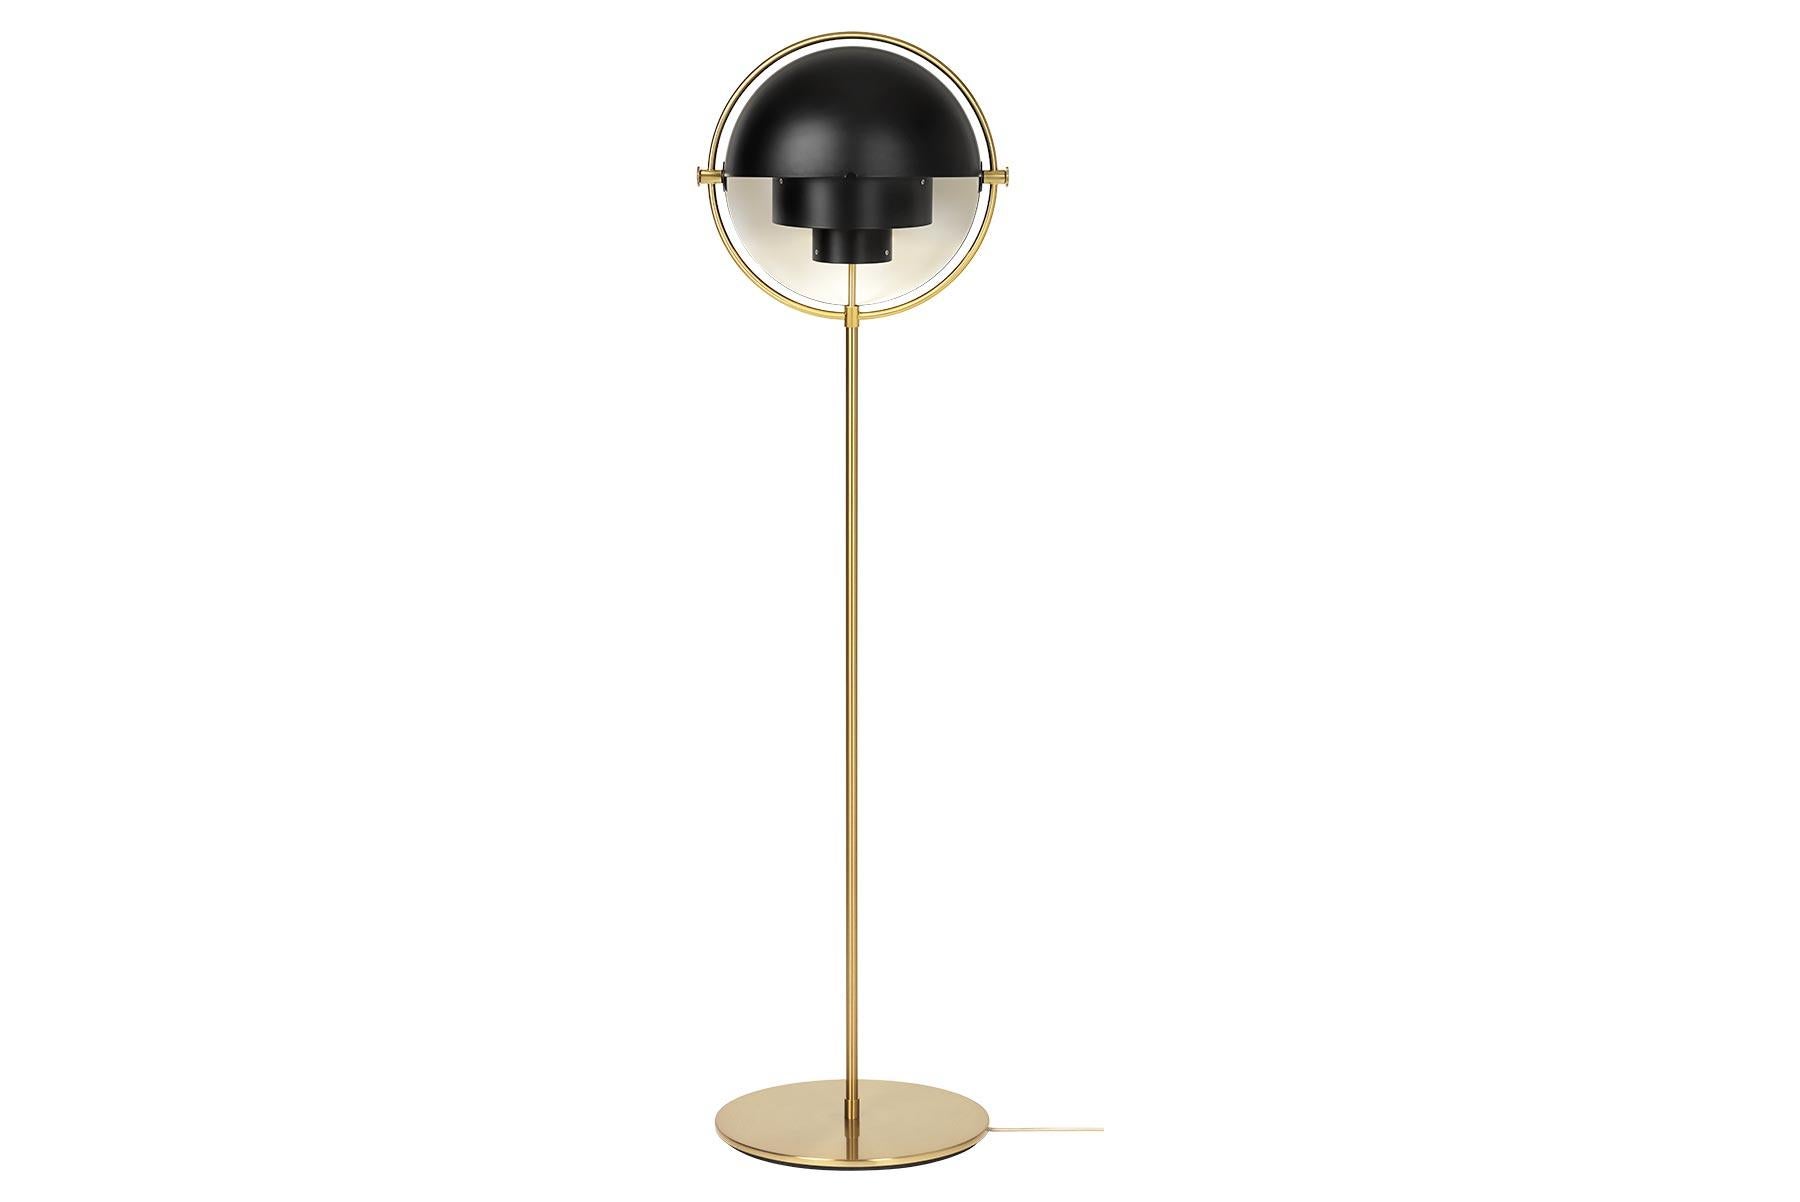 The Multi-Lite floor lamp embraces the golden era of Danish design with its characteristic shape of two opposing outside, mobile shades that enable creating a personal installation and a wide range of lighting values in a room. By individually